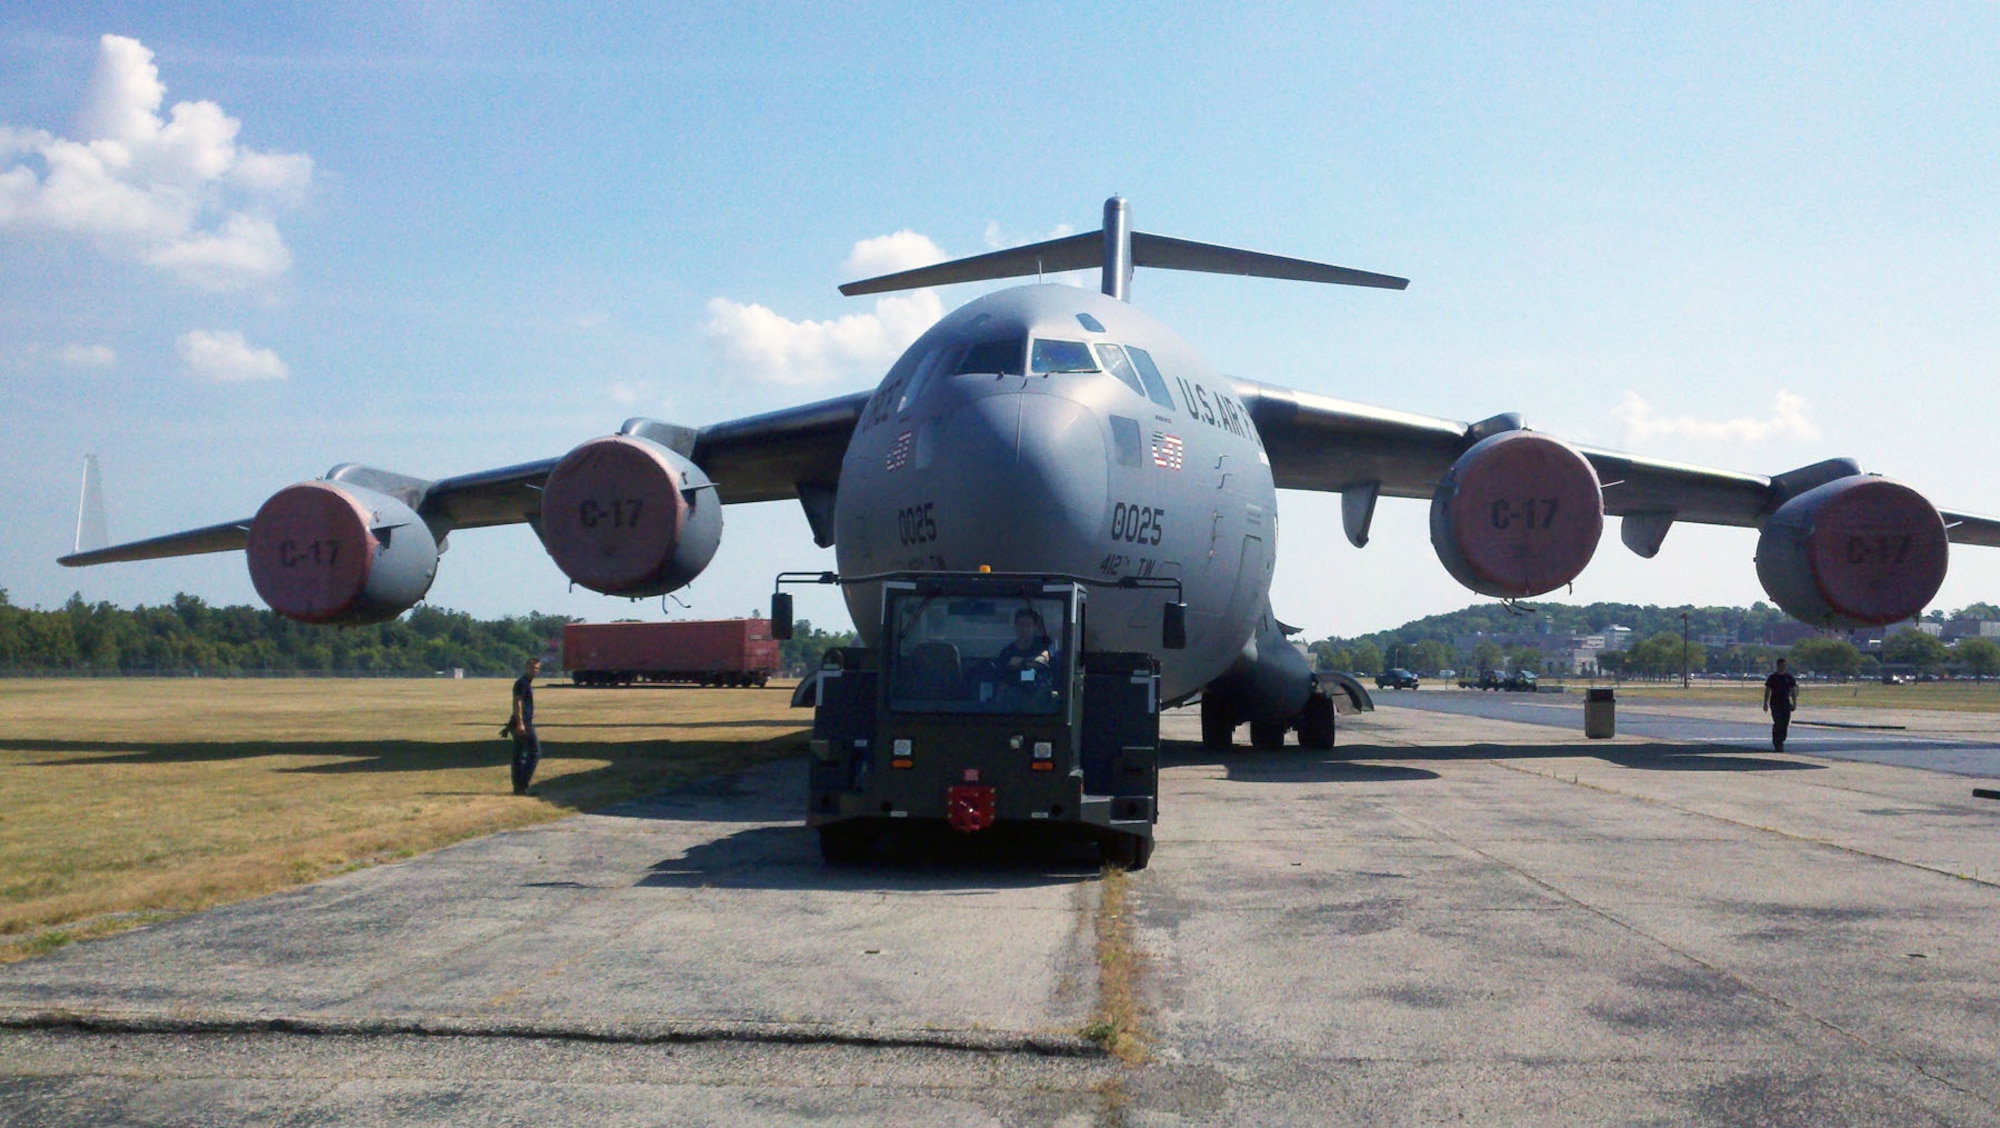 DAYTON, Ohio -- The C-17 is towed to its exhibit space in the Air Park at the National Museum of the U.S. Air Force. (U.S. Air Force photo)